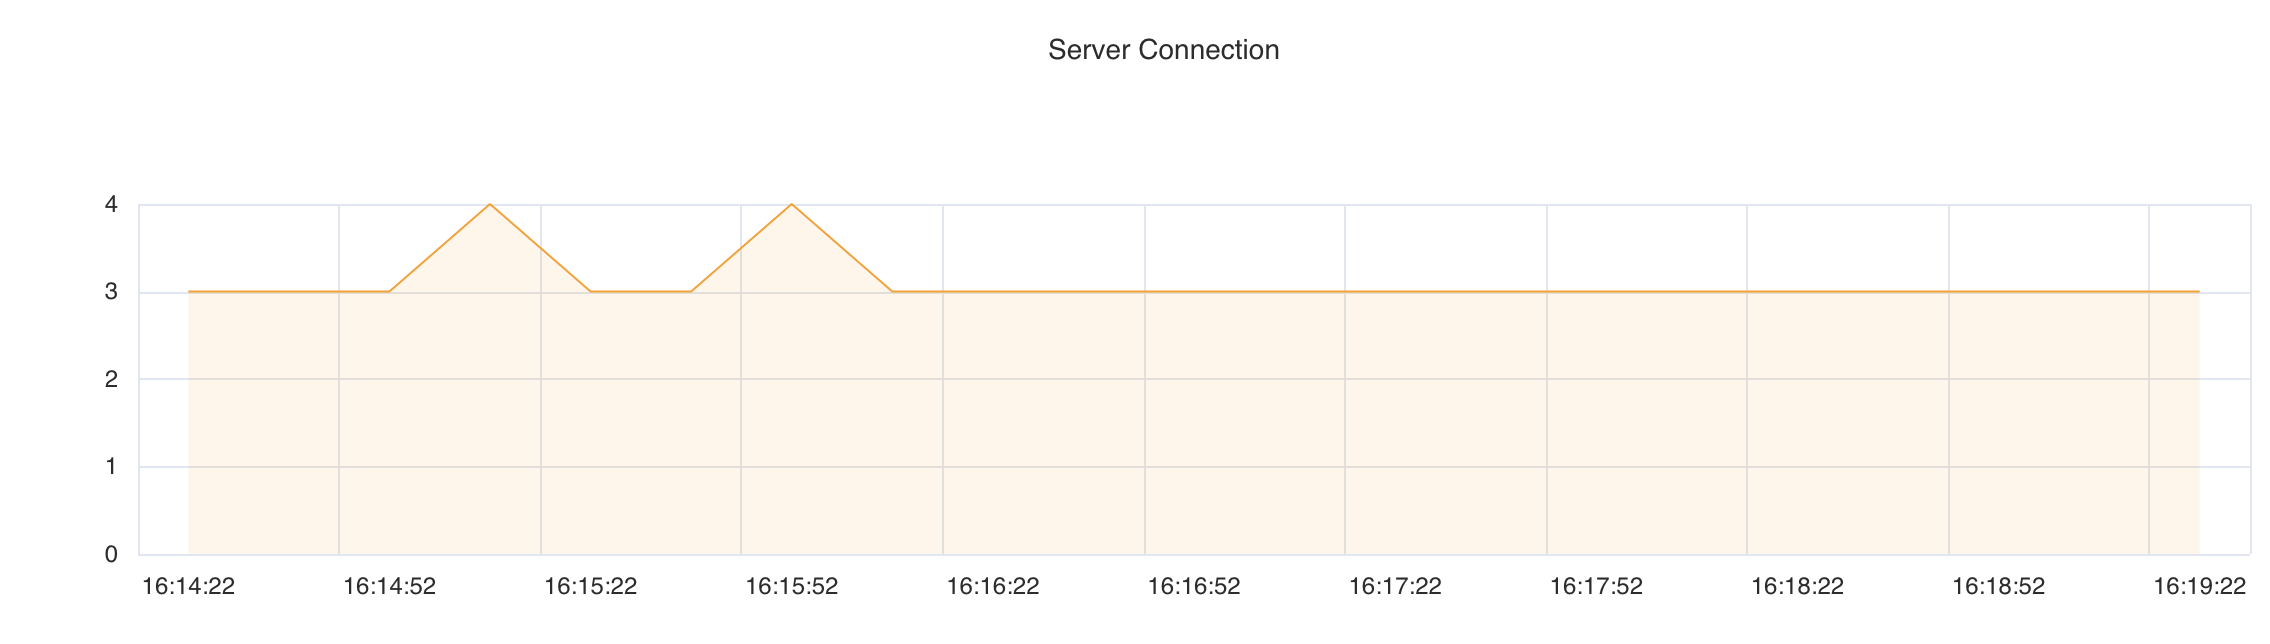 Server Connection